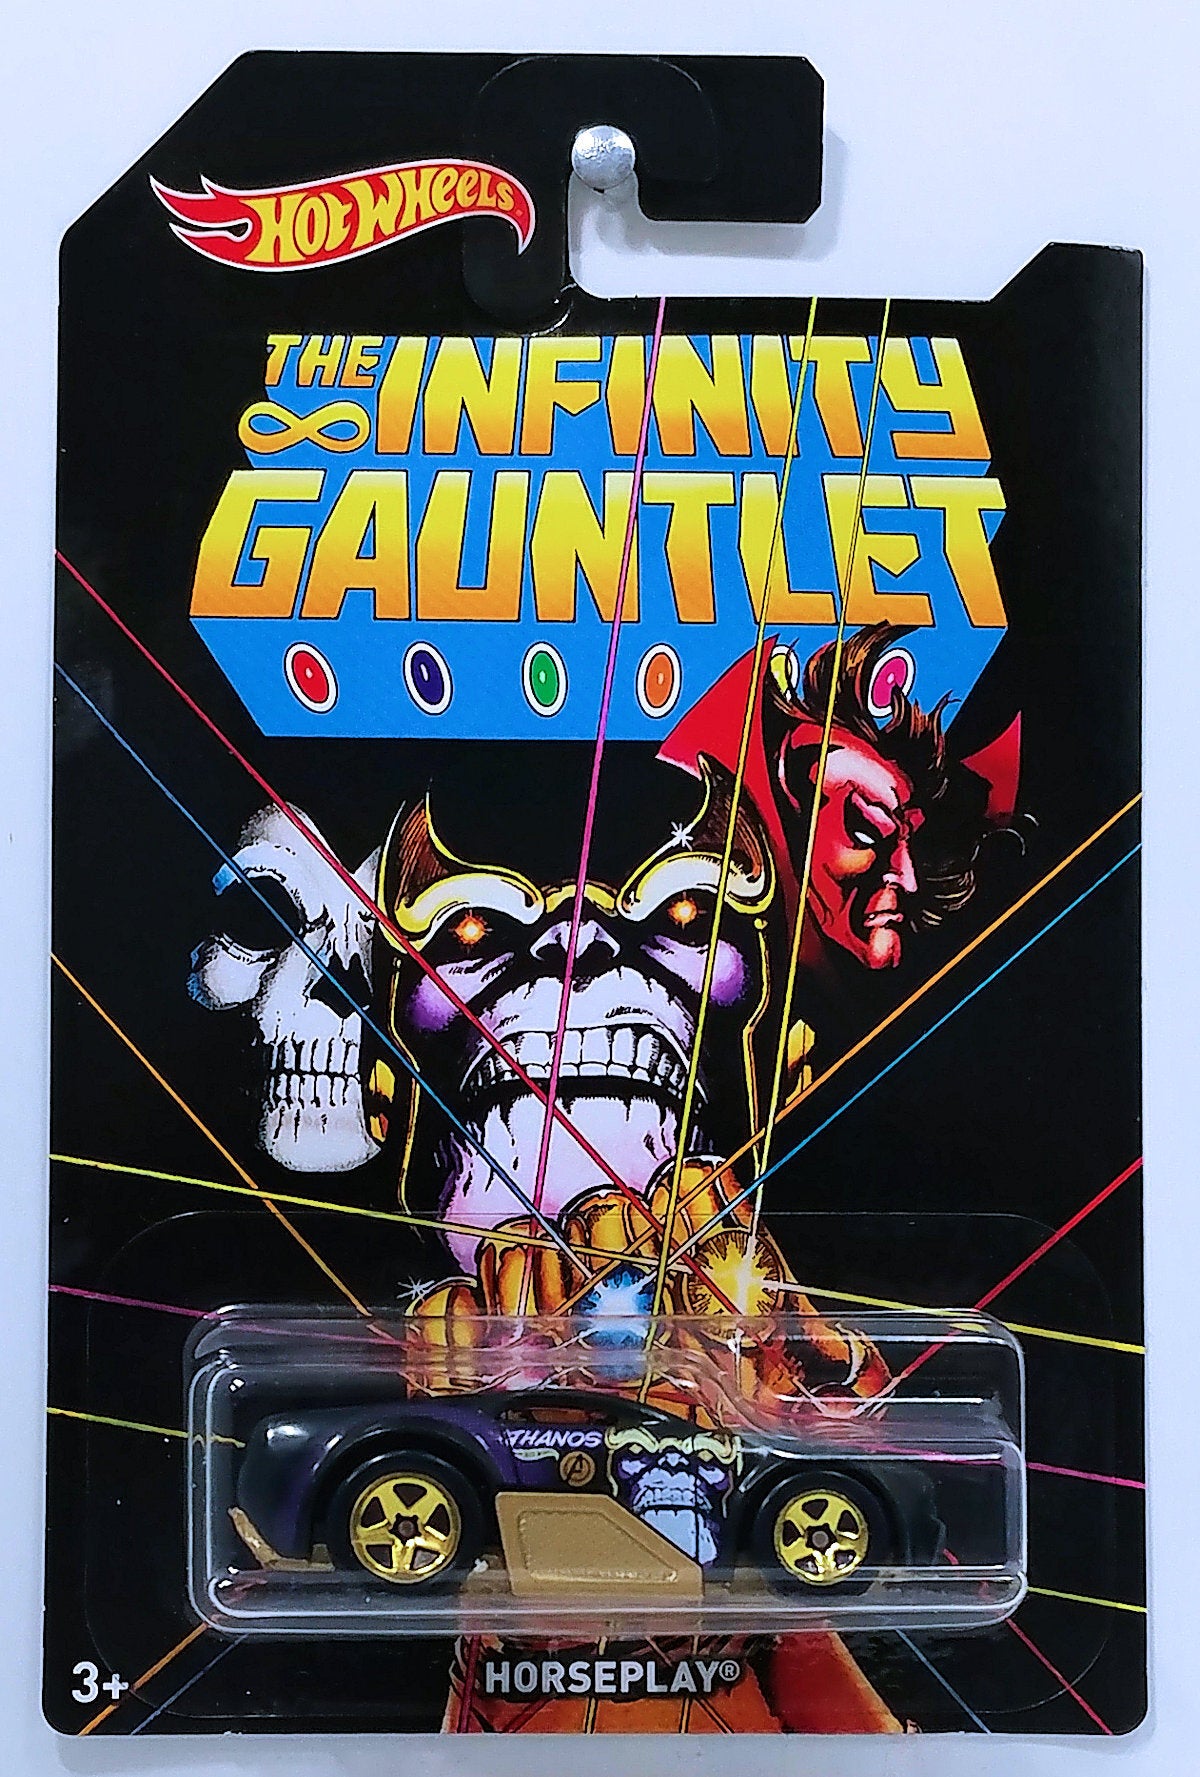 Hot Wheels 2018 - The Avengers CHASE - The Infinity Gauntlet - Horseplay - Black